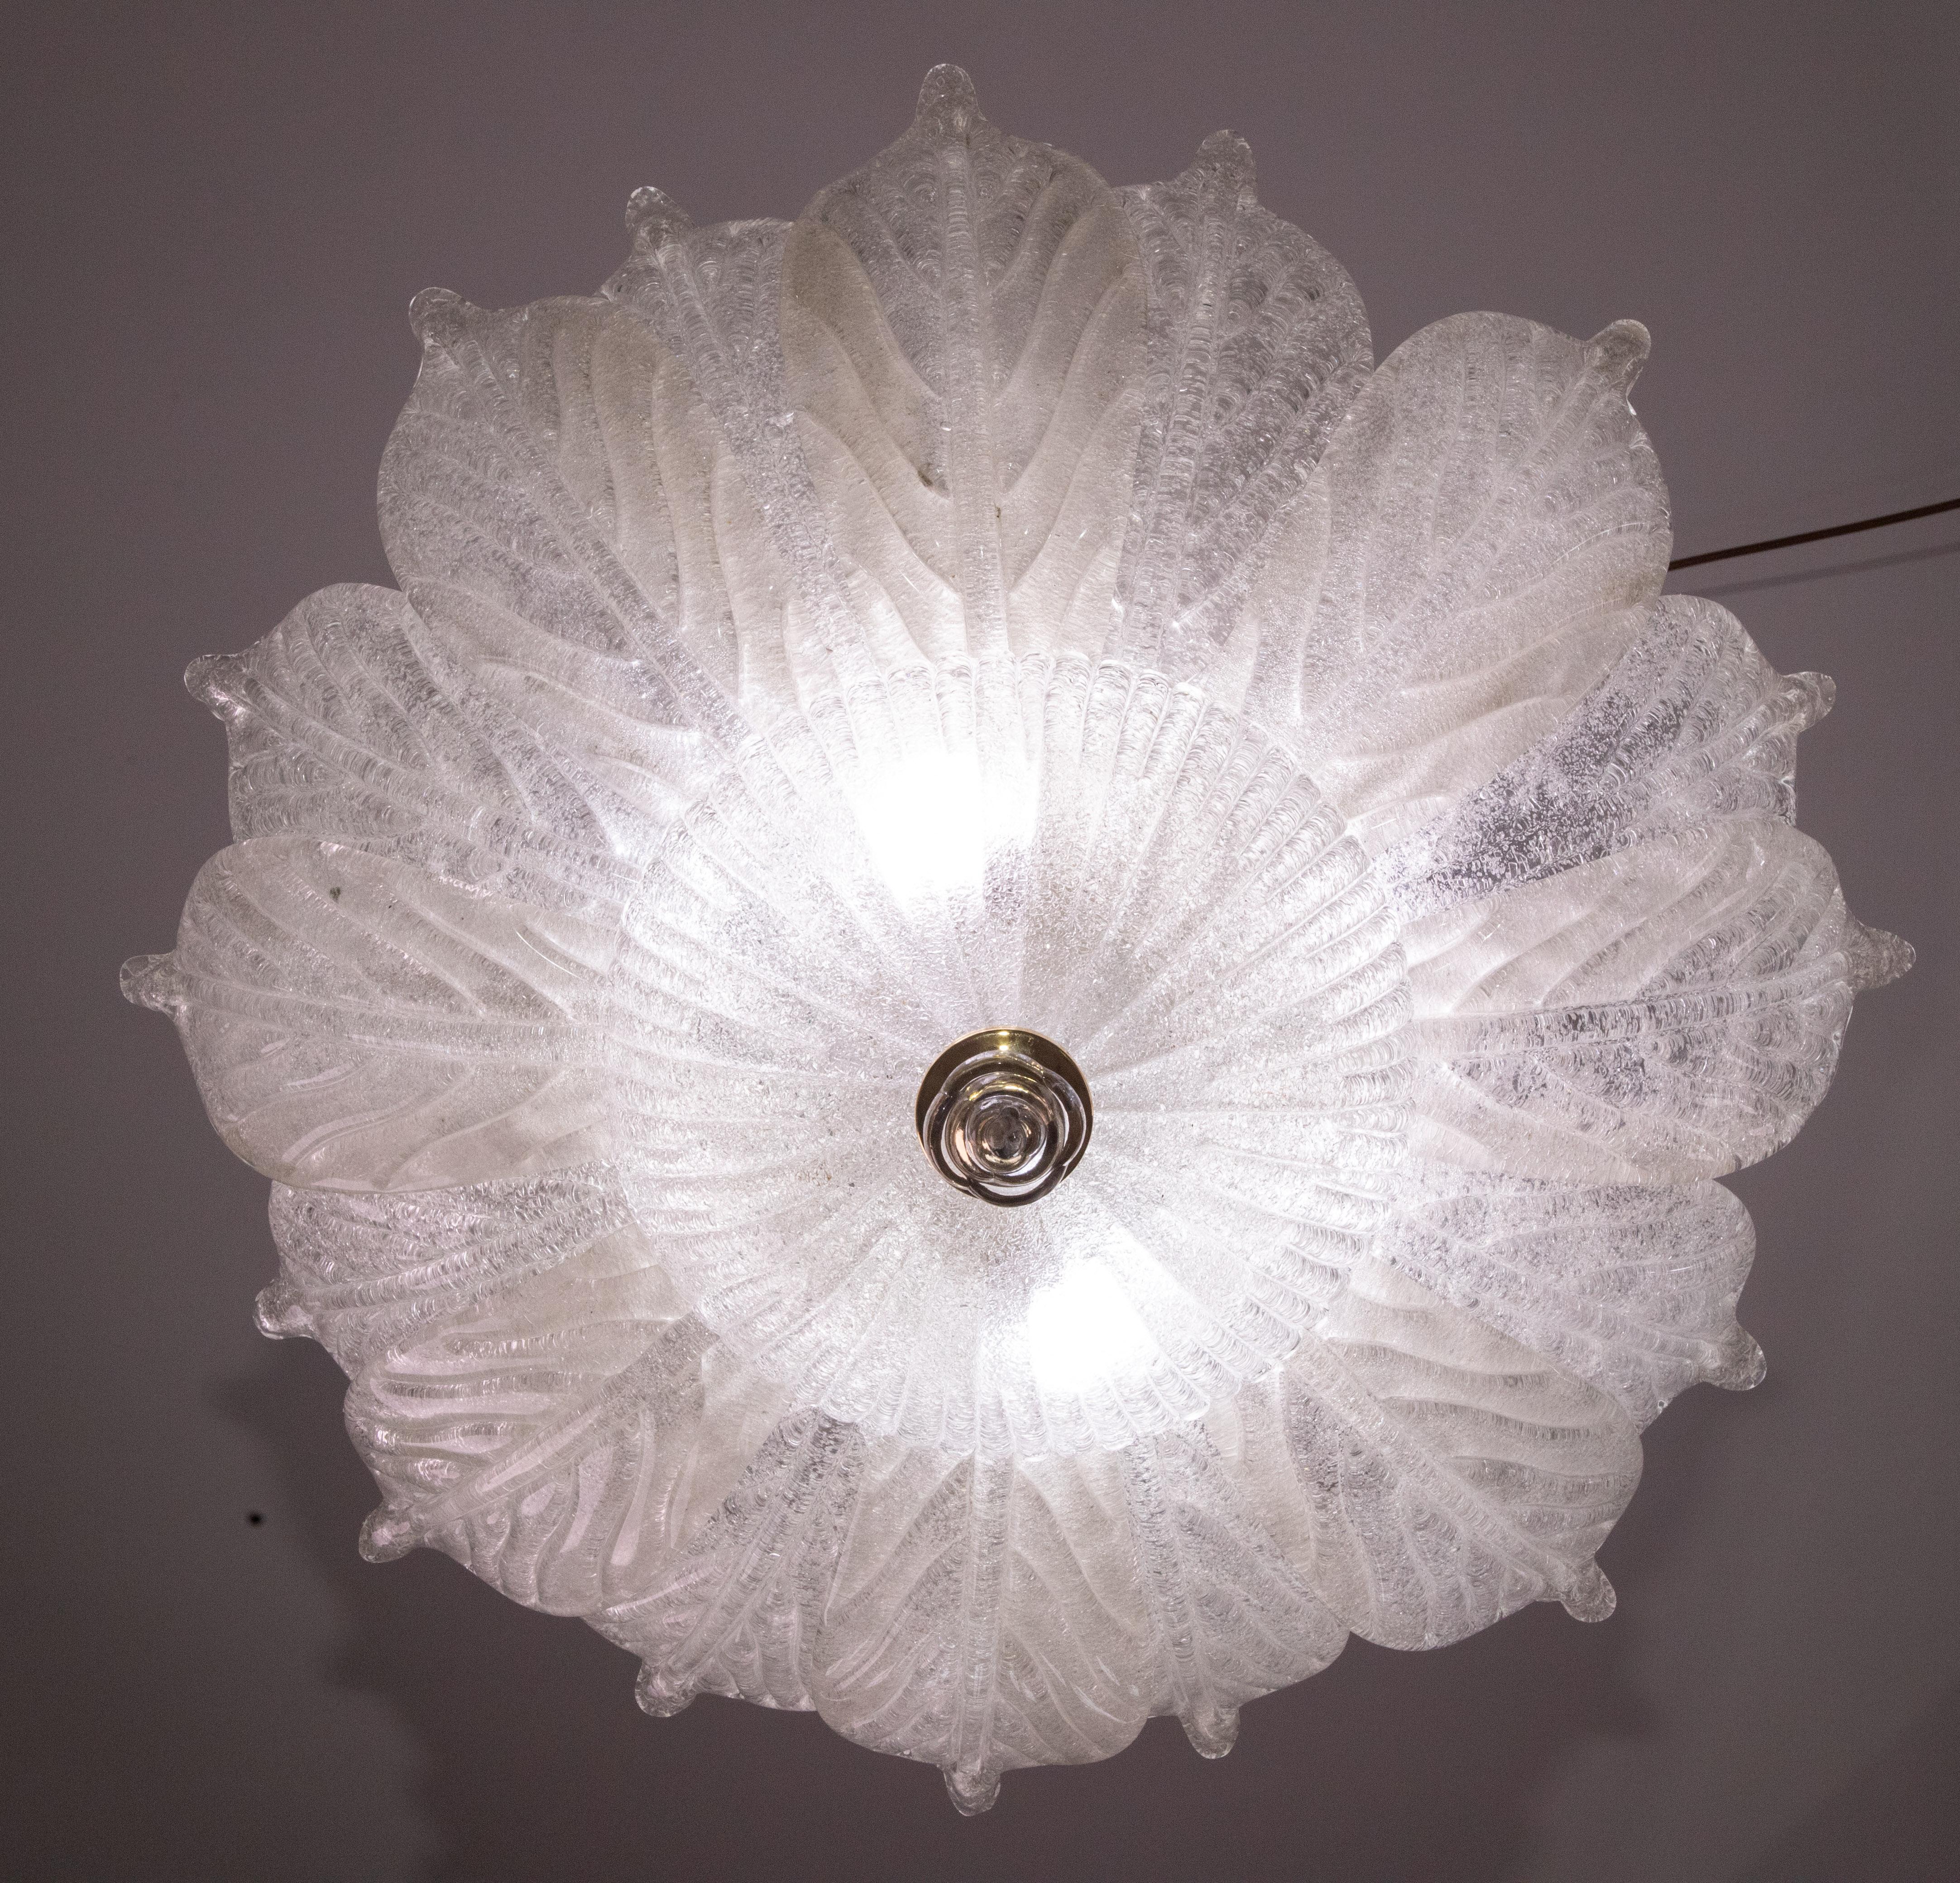 Splendid Murano glass ceiling lamp.

Period: circa 1970.

The light mounts 10 standard European e14 lamp holders.

Perfect for decorating a large space.

Height measures 30 centimeters from the ceiling, diameter about 70-75 centimeters.